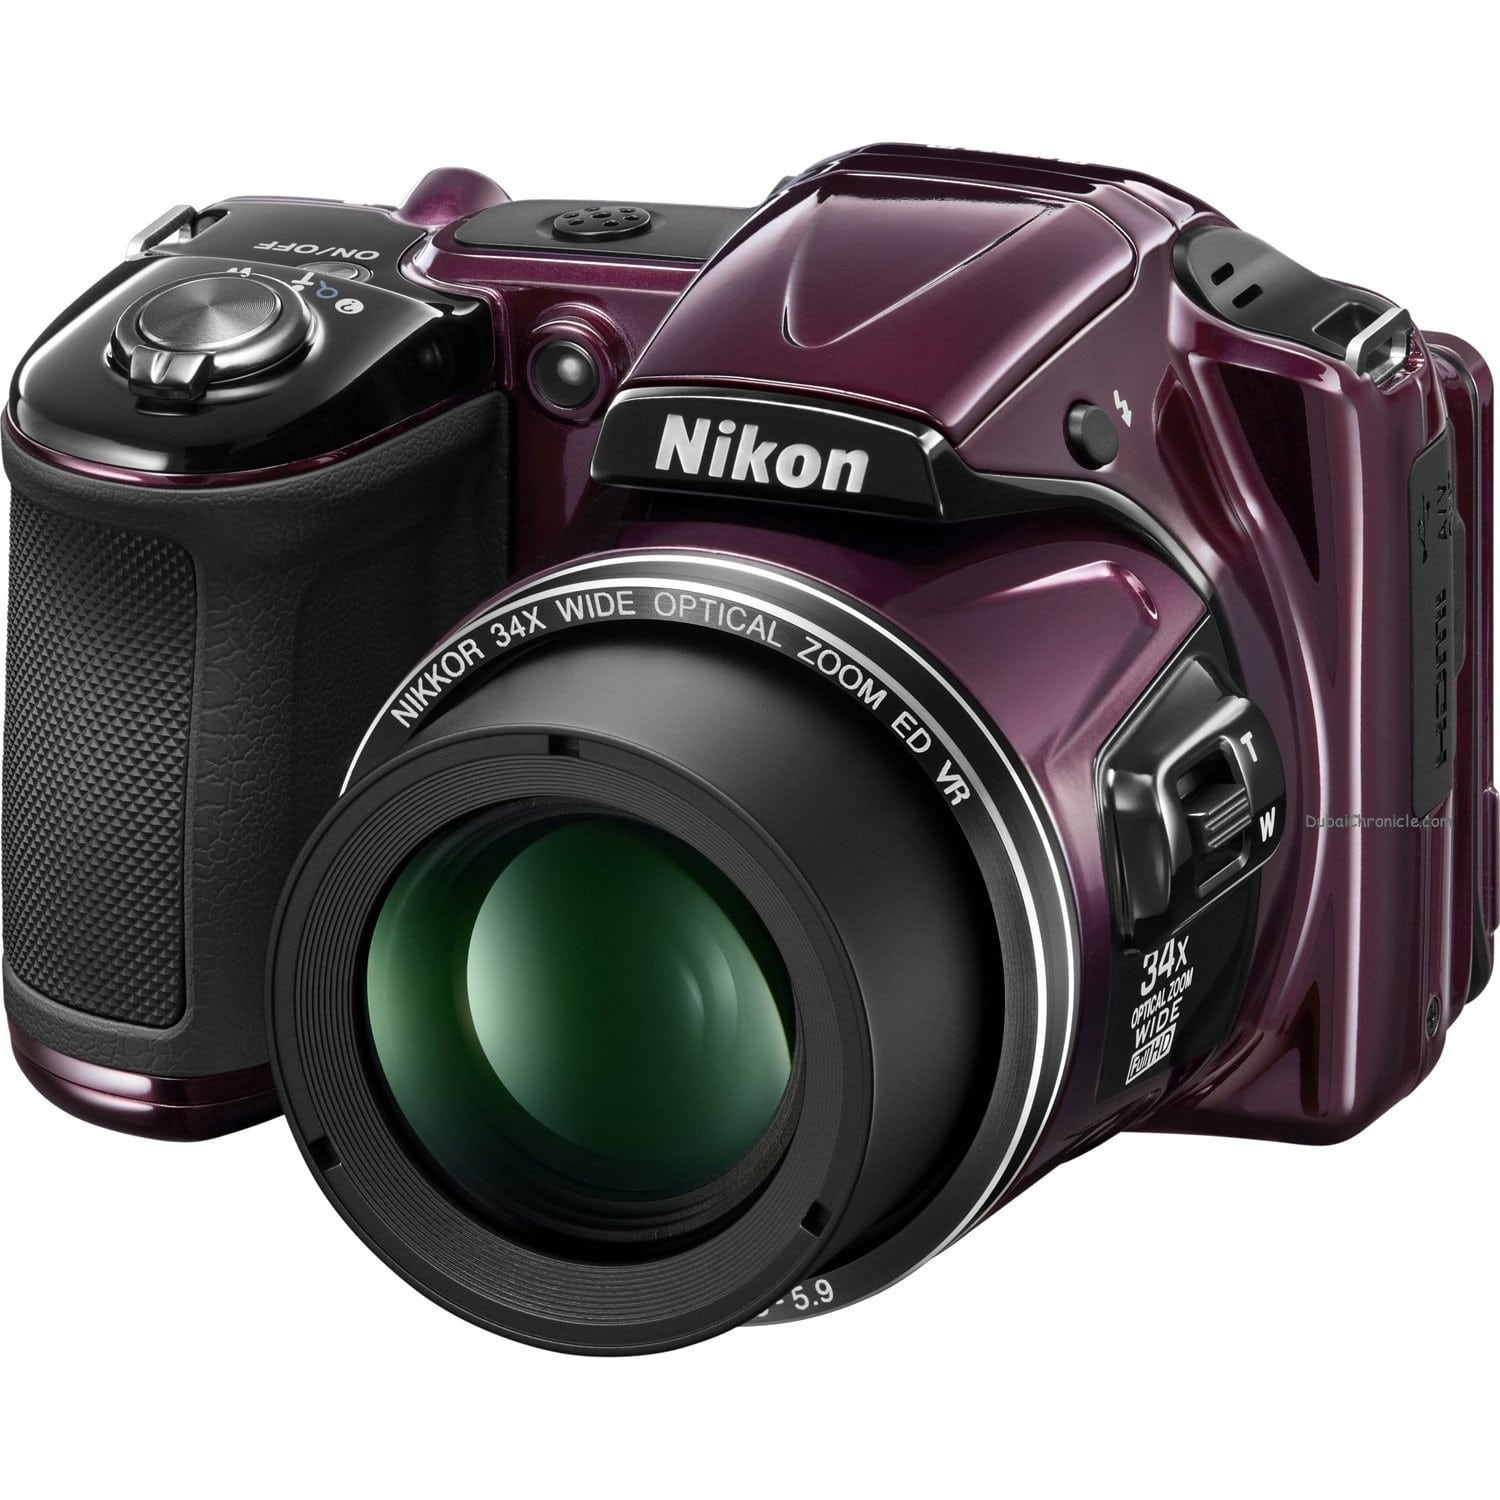 Nikon COOLPIX L830 16 MP CMOS Digital Camera with 34x Zoom NIKKOR Lens and Full 1080p HD Video (Plum)